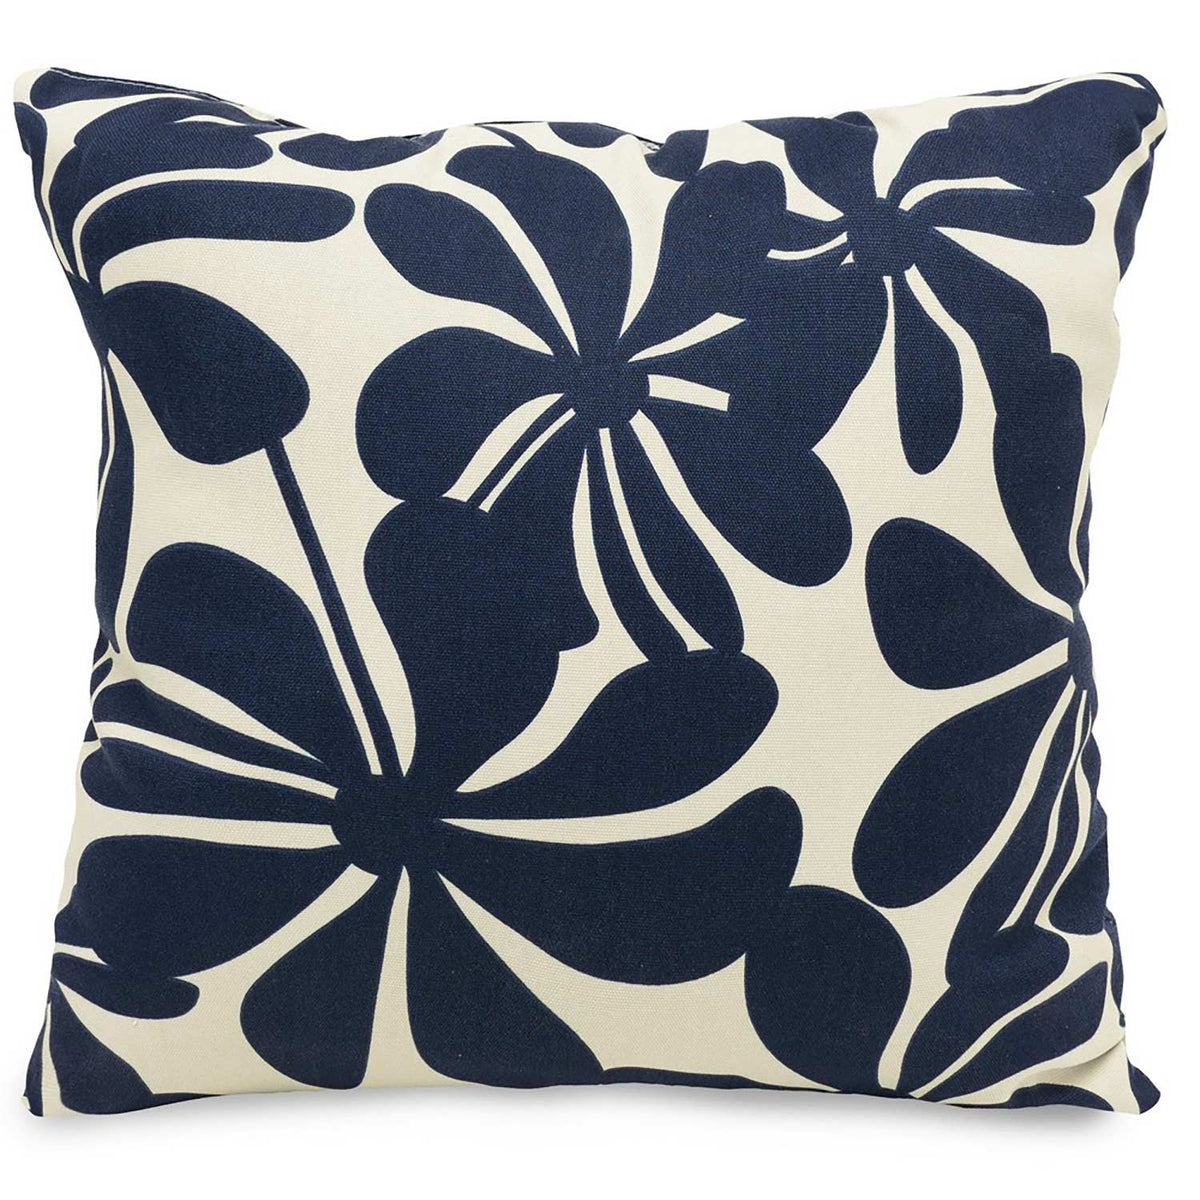 Majestic Home Goods Indoor/Outdoor French Quarter Large Pillow, Navy Blue